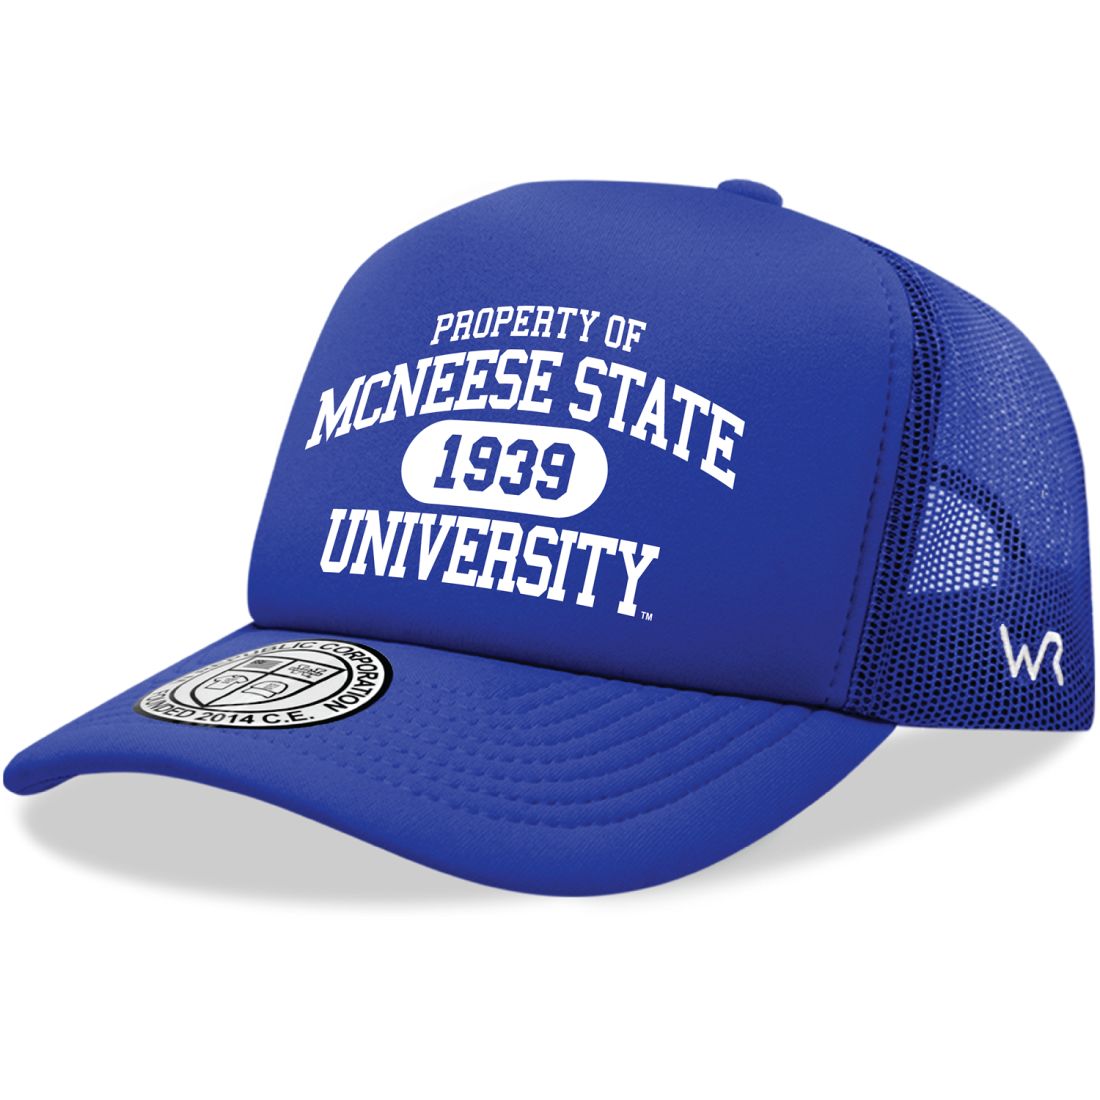 McNeese State University Cowboys and Cowgirls Property Foam Trucker Hats